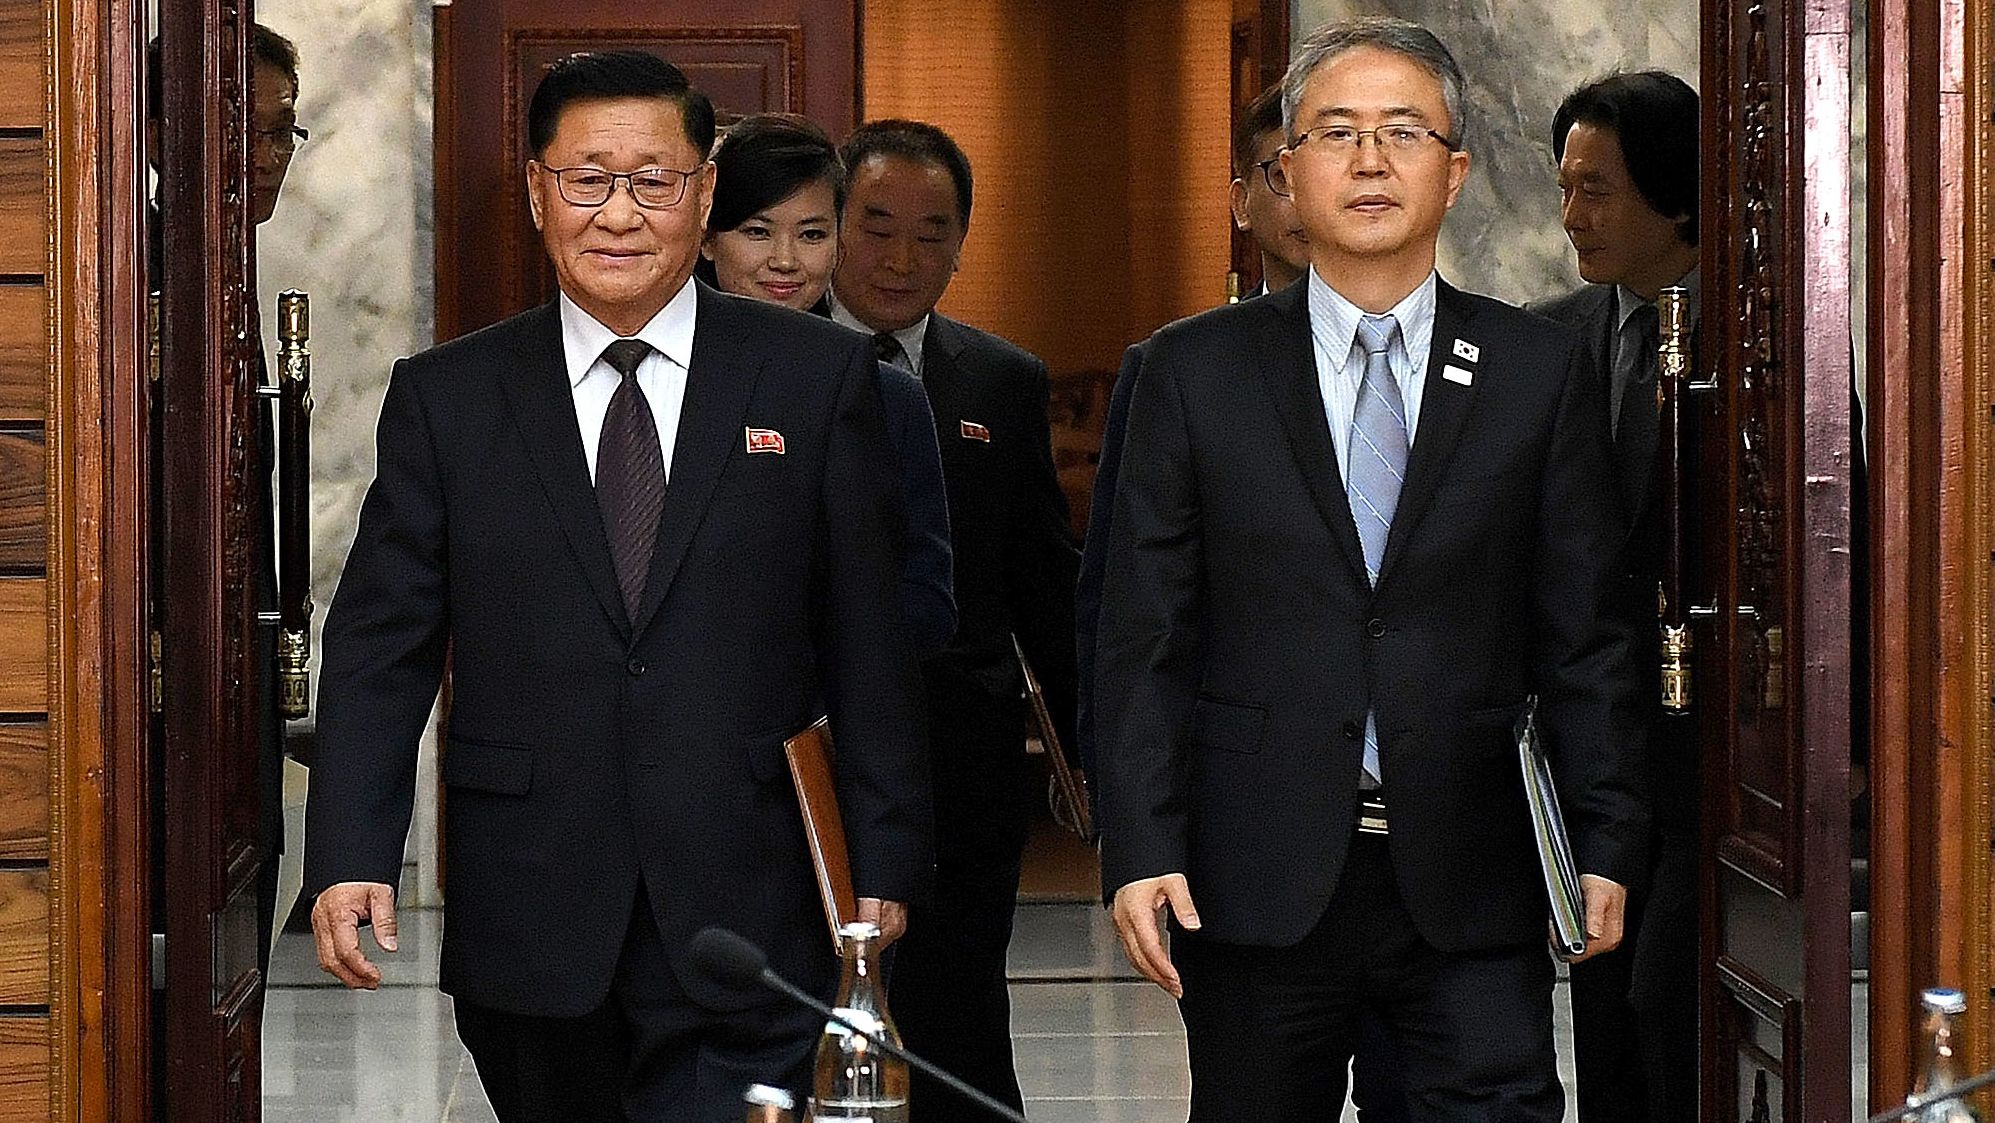 Moranbong member Hyon Song Wol seen with North and South Korean officials on January 15, 2018.